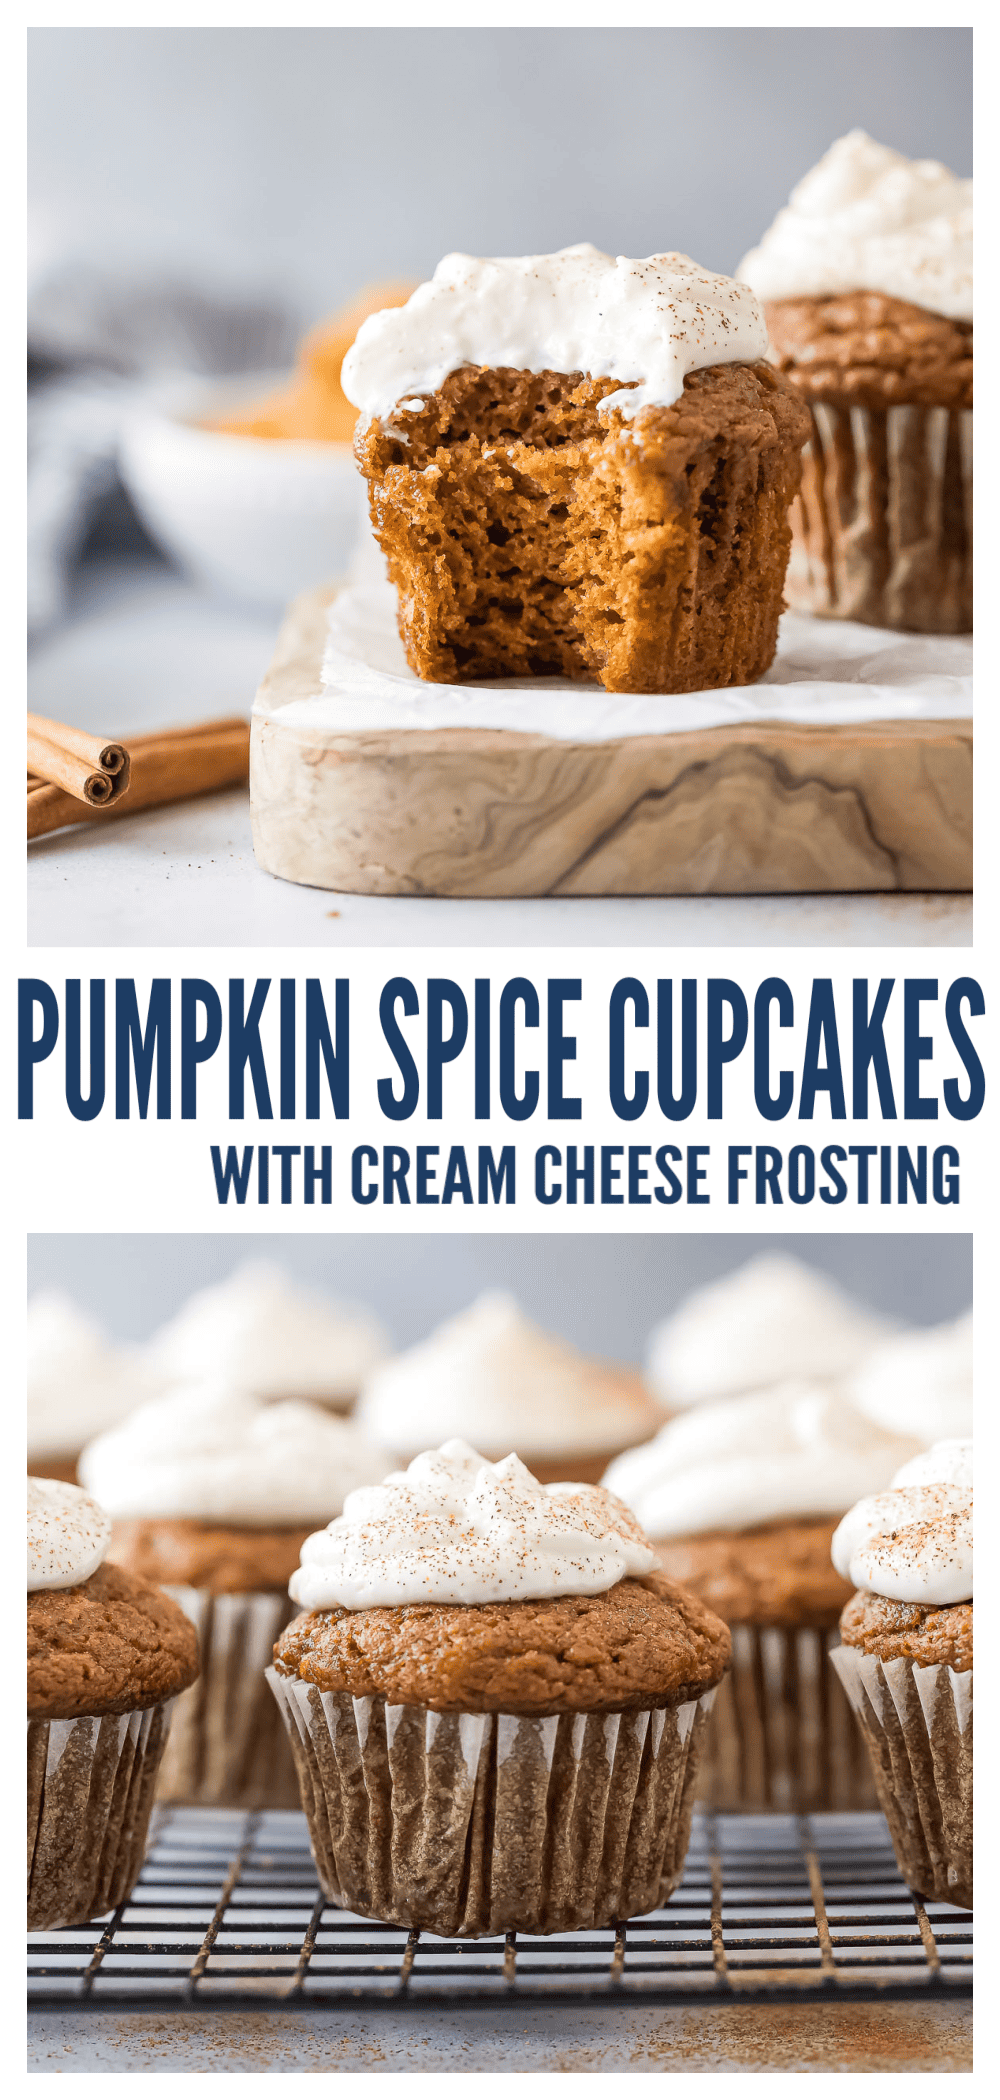 pinterest image of pumpkin spice cupcakes with cream cheese frosting